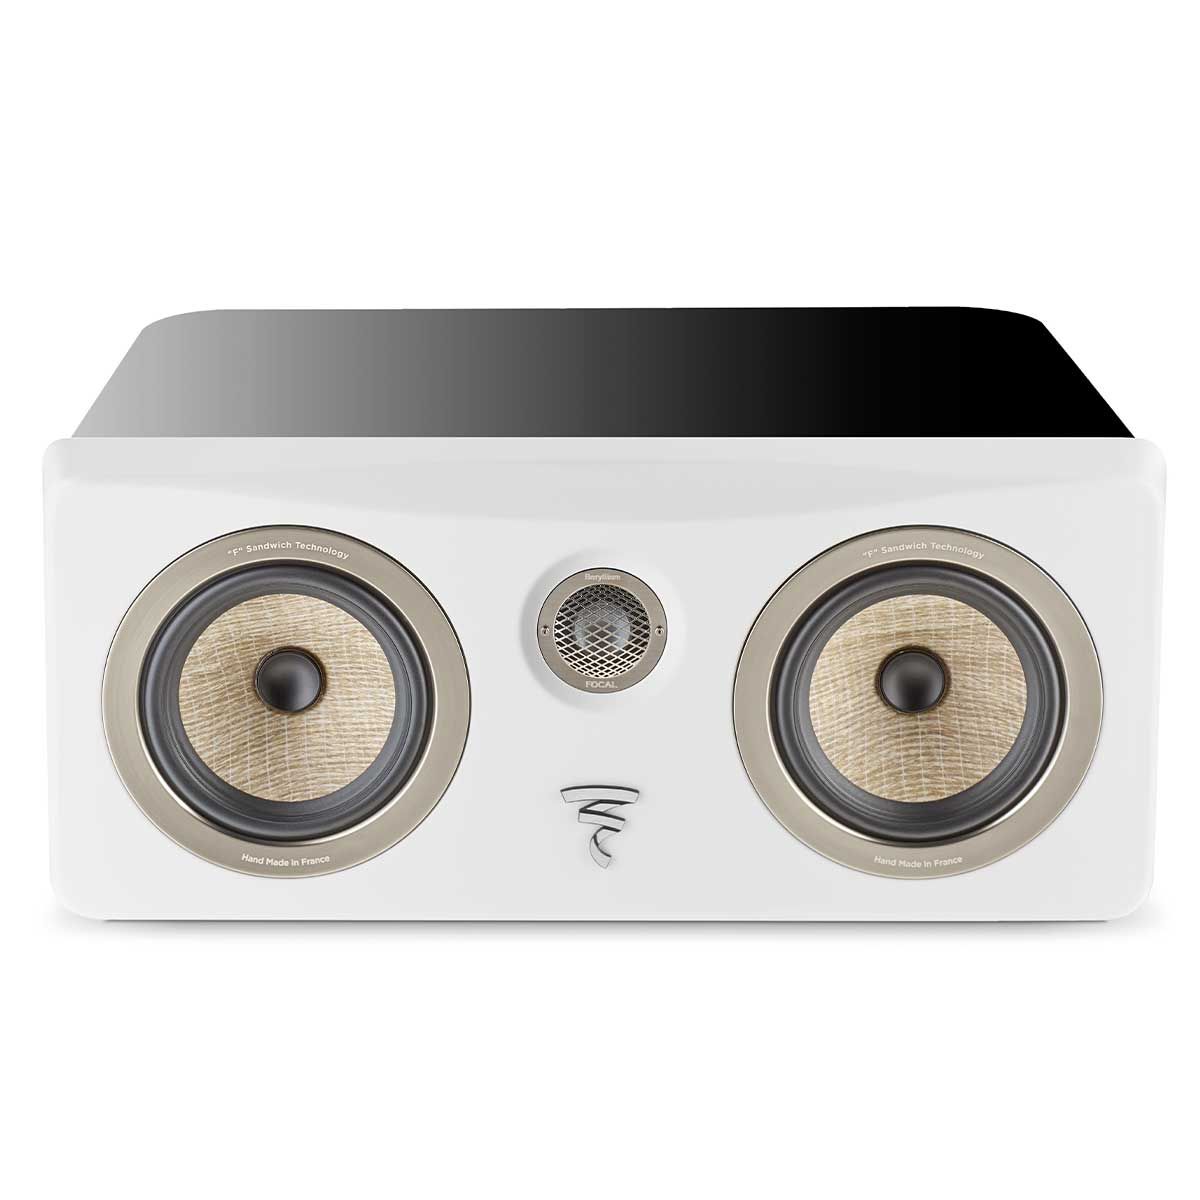 Focal Kanta Center Speaker, Gloss Black/Gloss White, front without grille